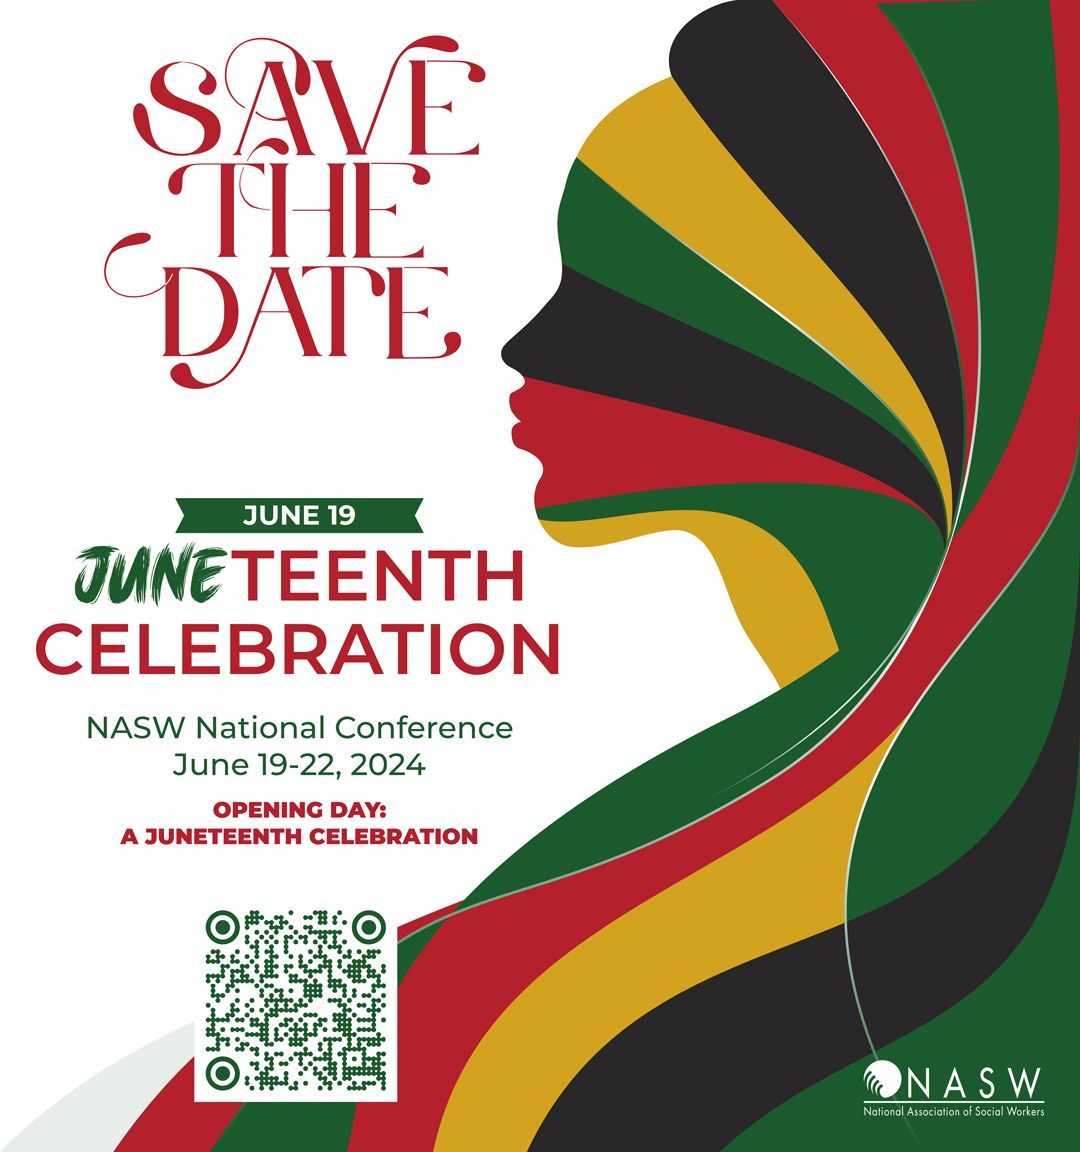 #ICYMI Join thousands of #SocialWorkers, like-minded professionals and social work thought leaders at #NASW2024, our National Conference June 19-22! This year’s conference opens on Juneteenth. Please Join our opening celebration! Register today: buff.ly/3Jc11Bd